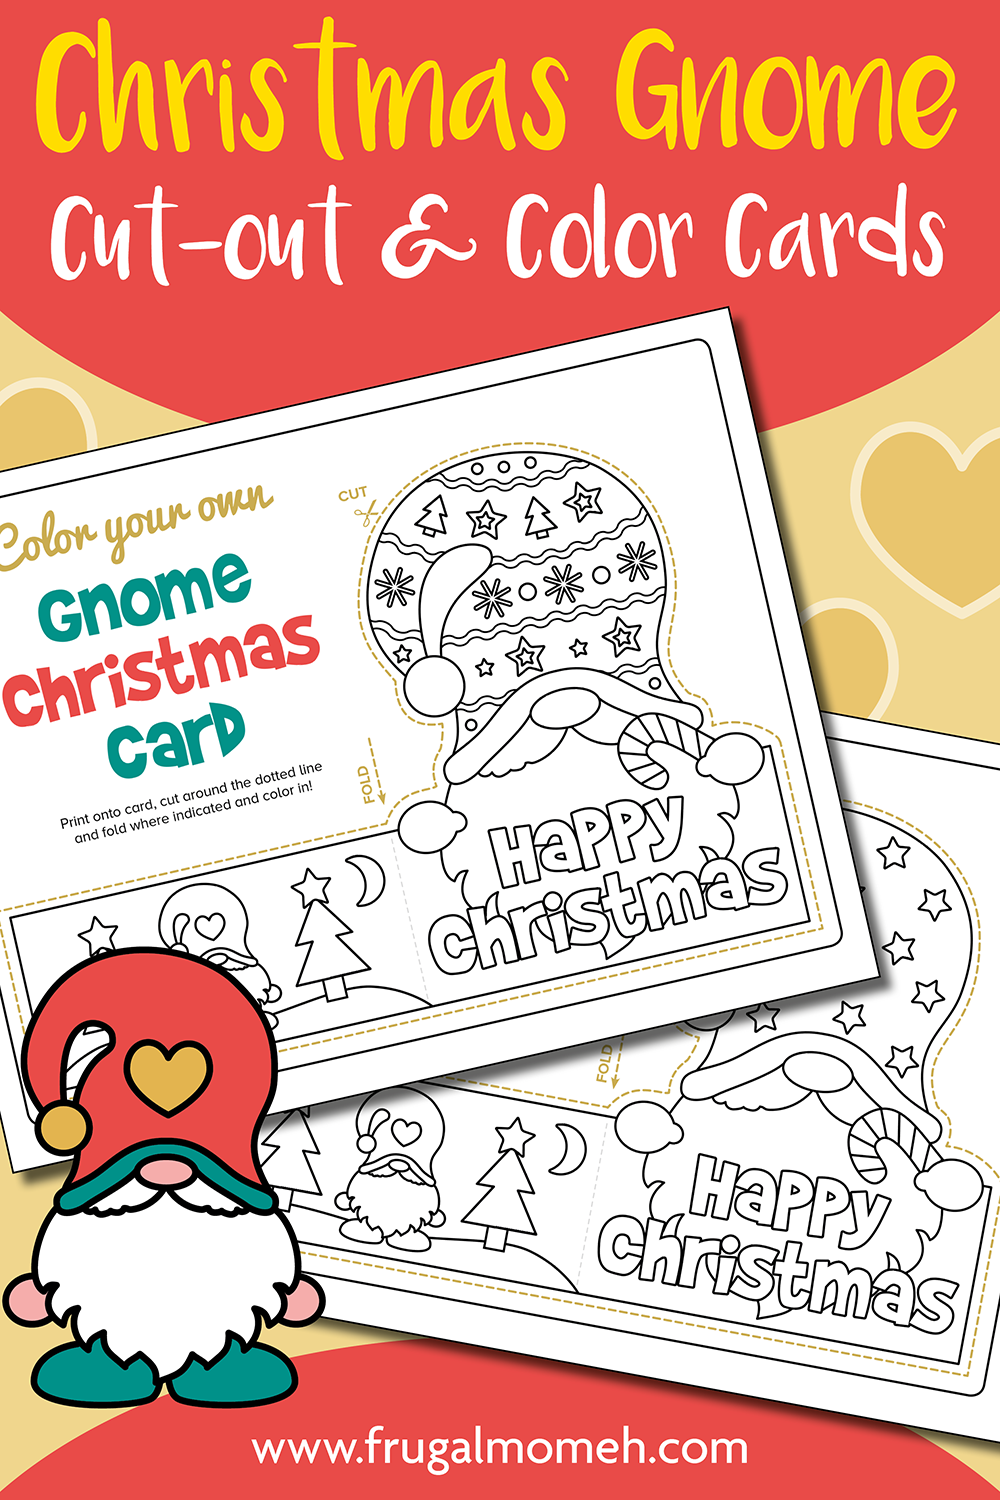 Here are free printable gnome Christmas cards - two gnomes to colour and one to design on your own! This is a fun holiday activity for kids!